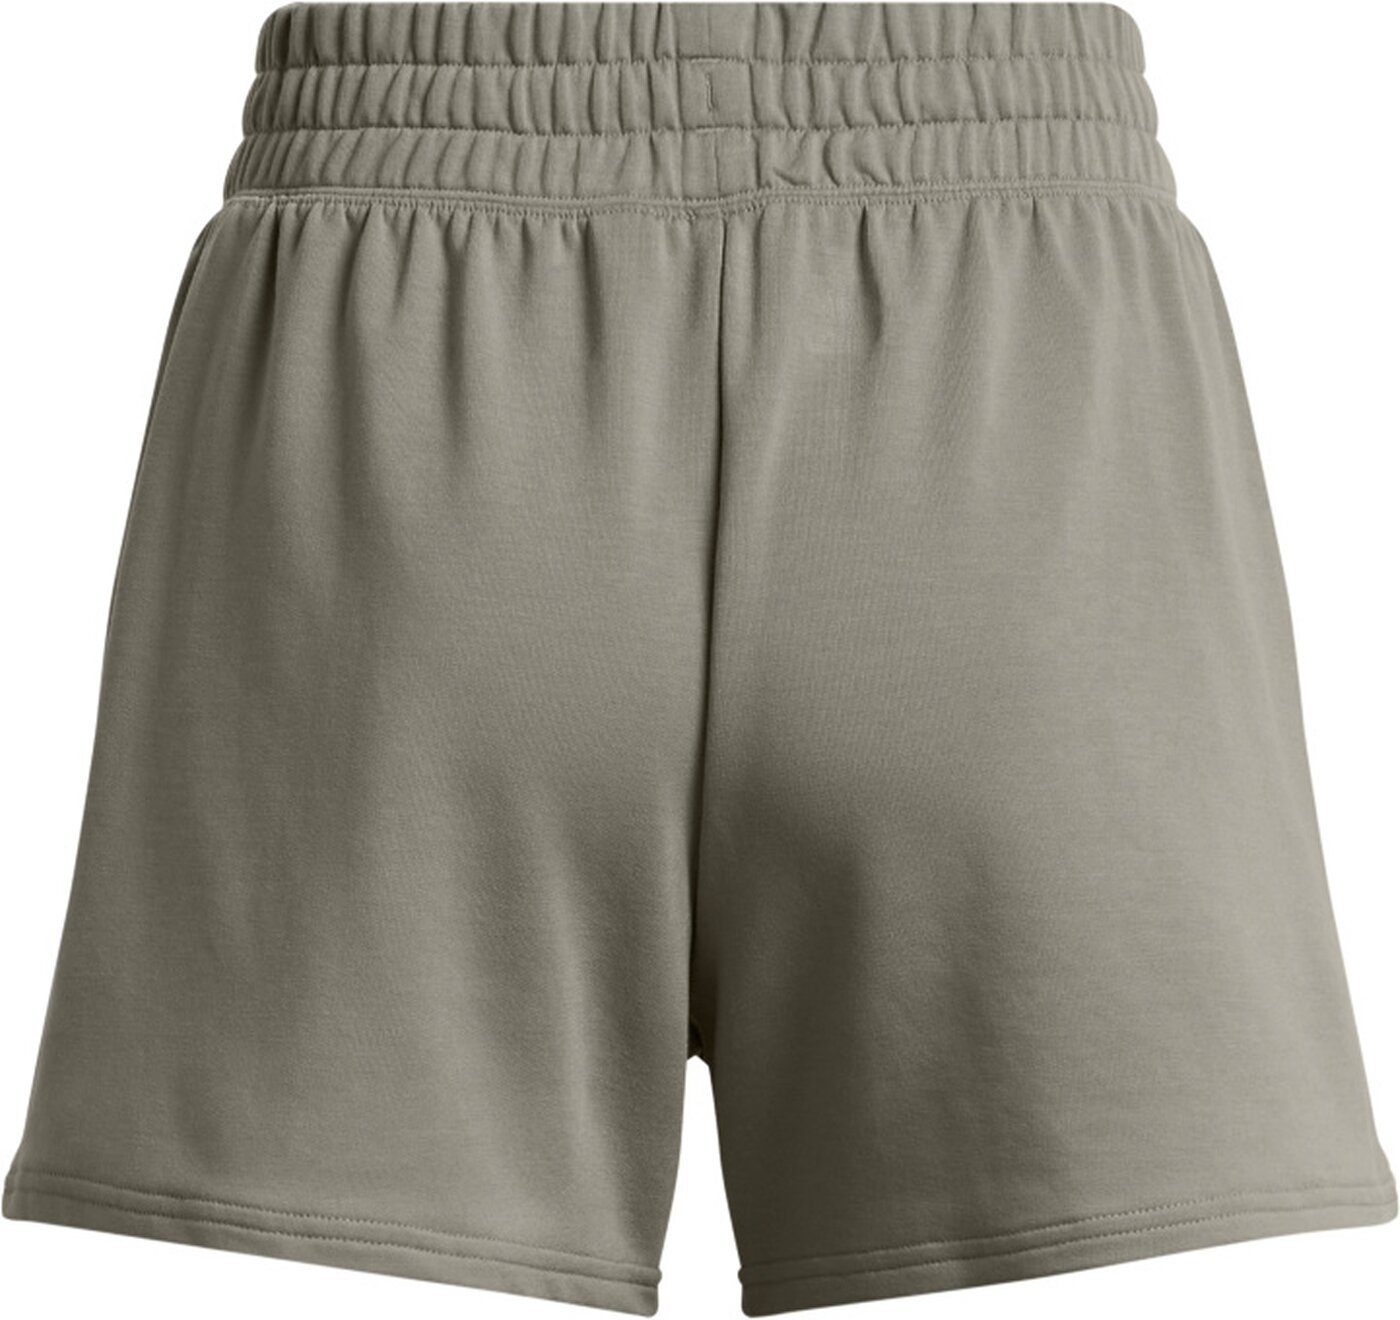 RIVAL Under TERRY UA SHORT Shorts Armour®